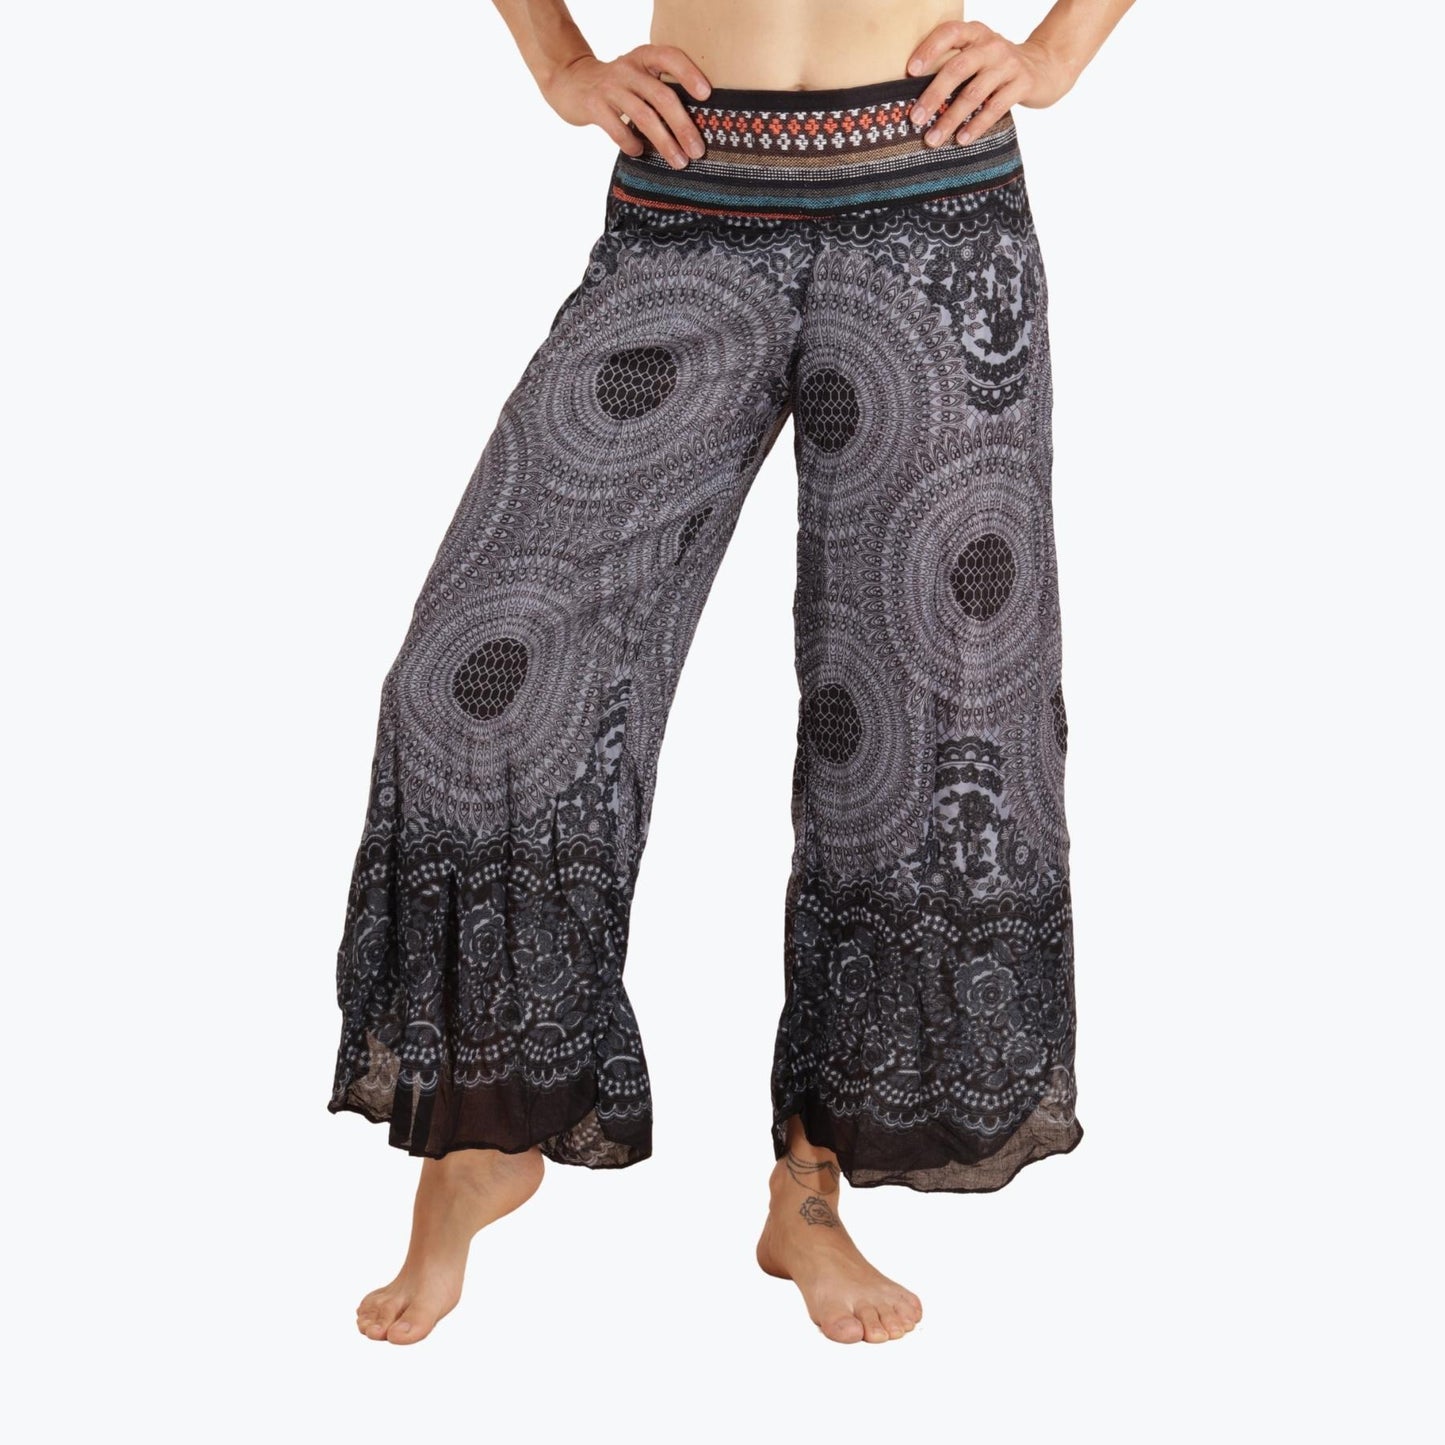 Summer trousers - Satra